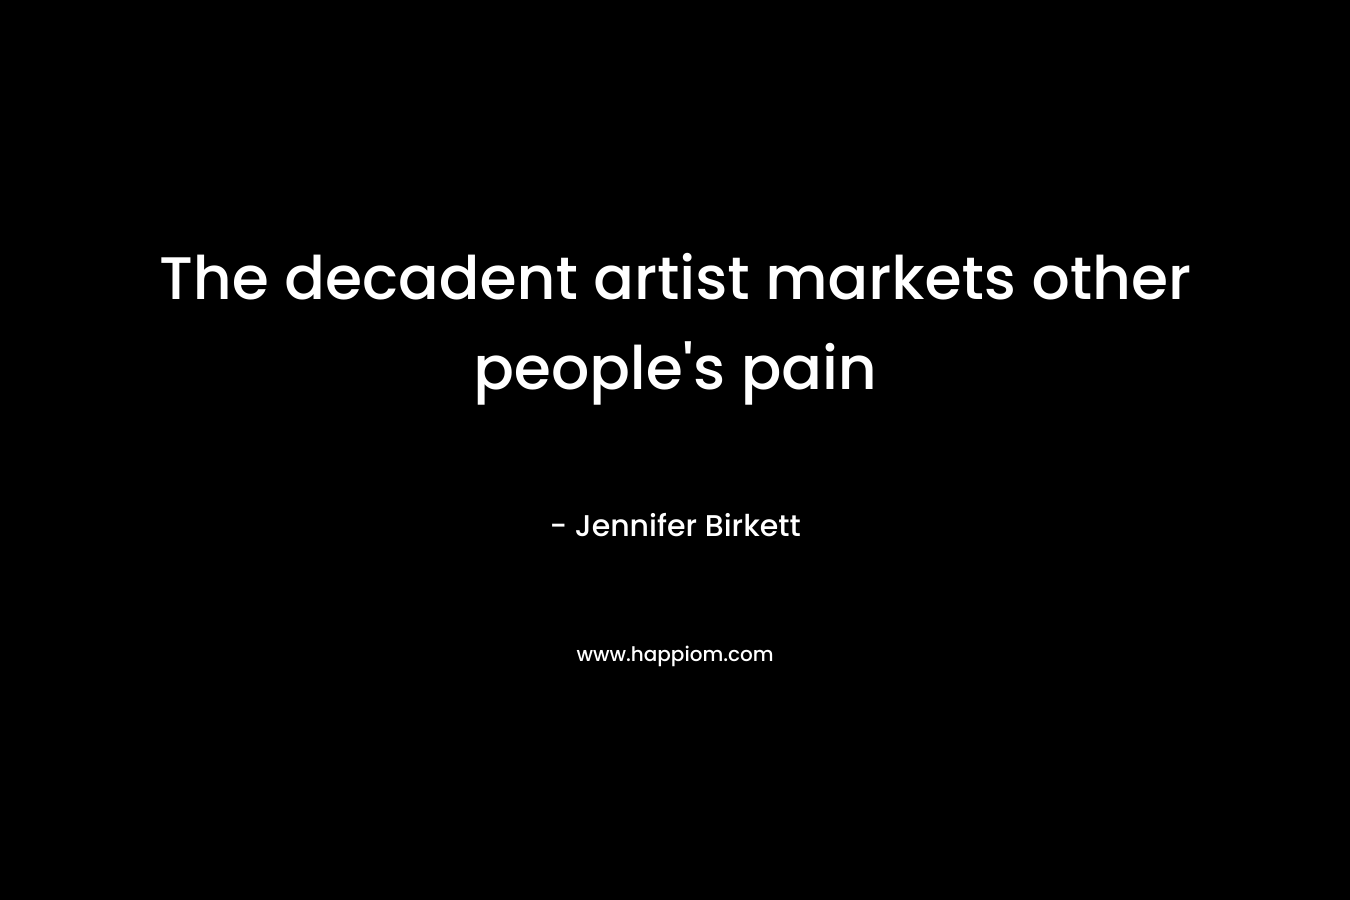 The decadent artist markets other people's pain